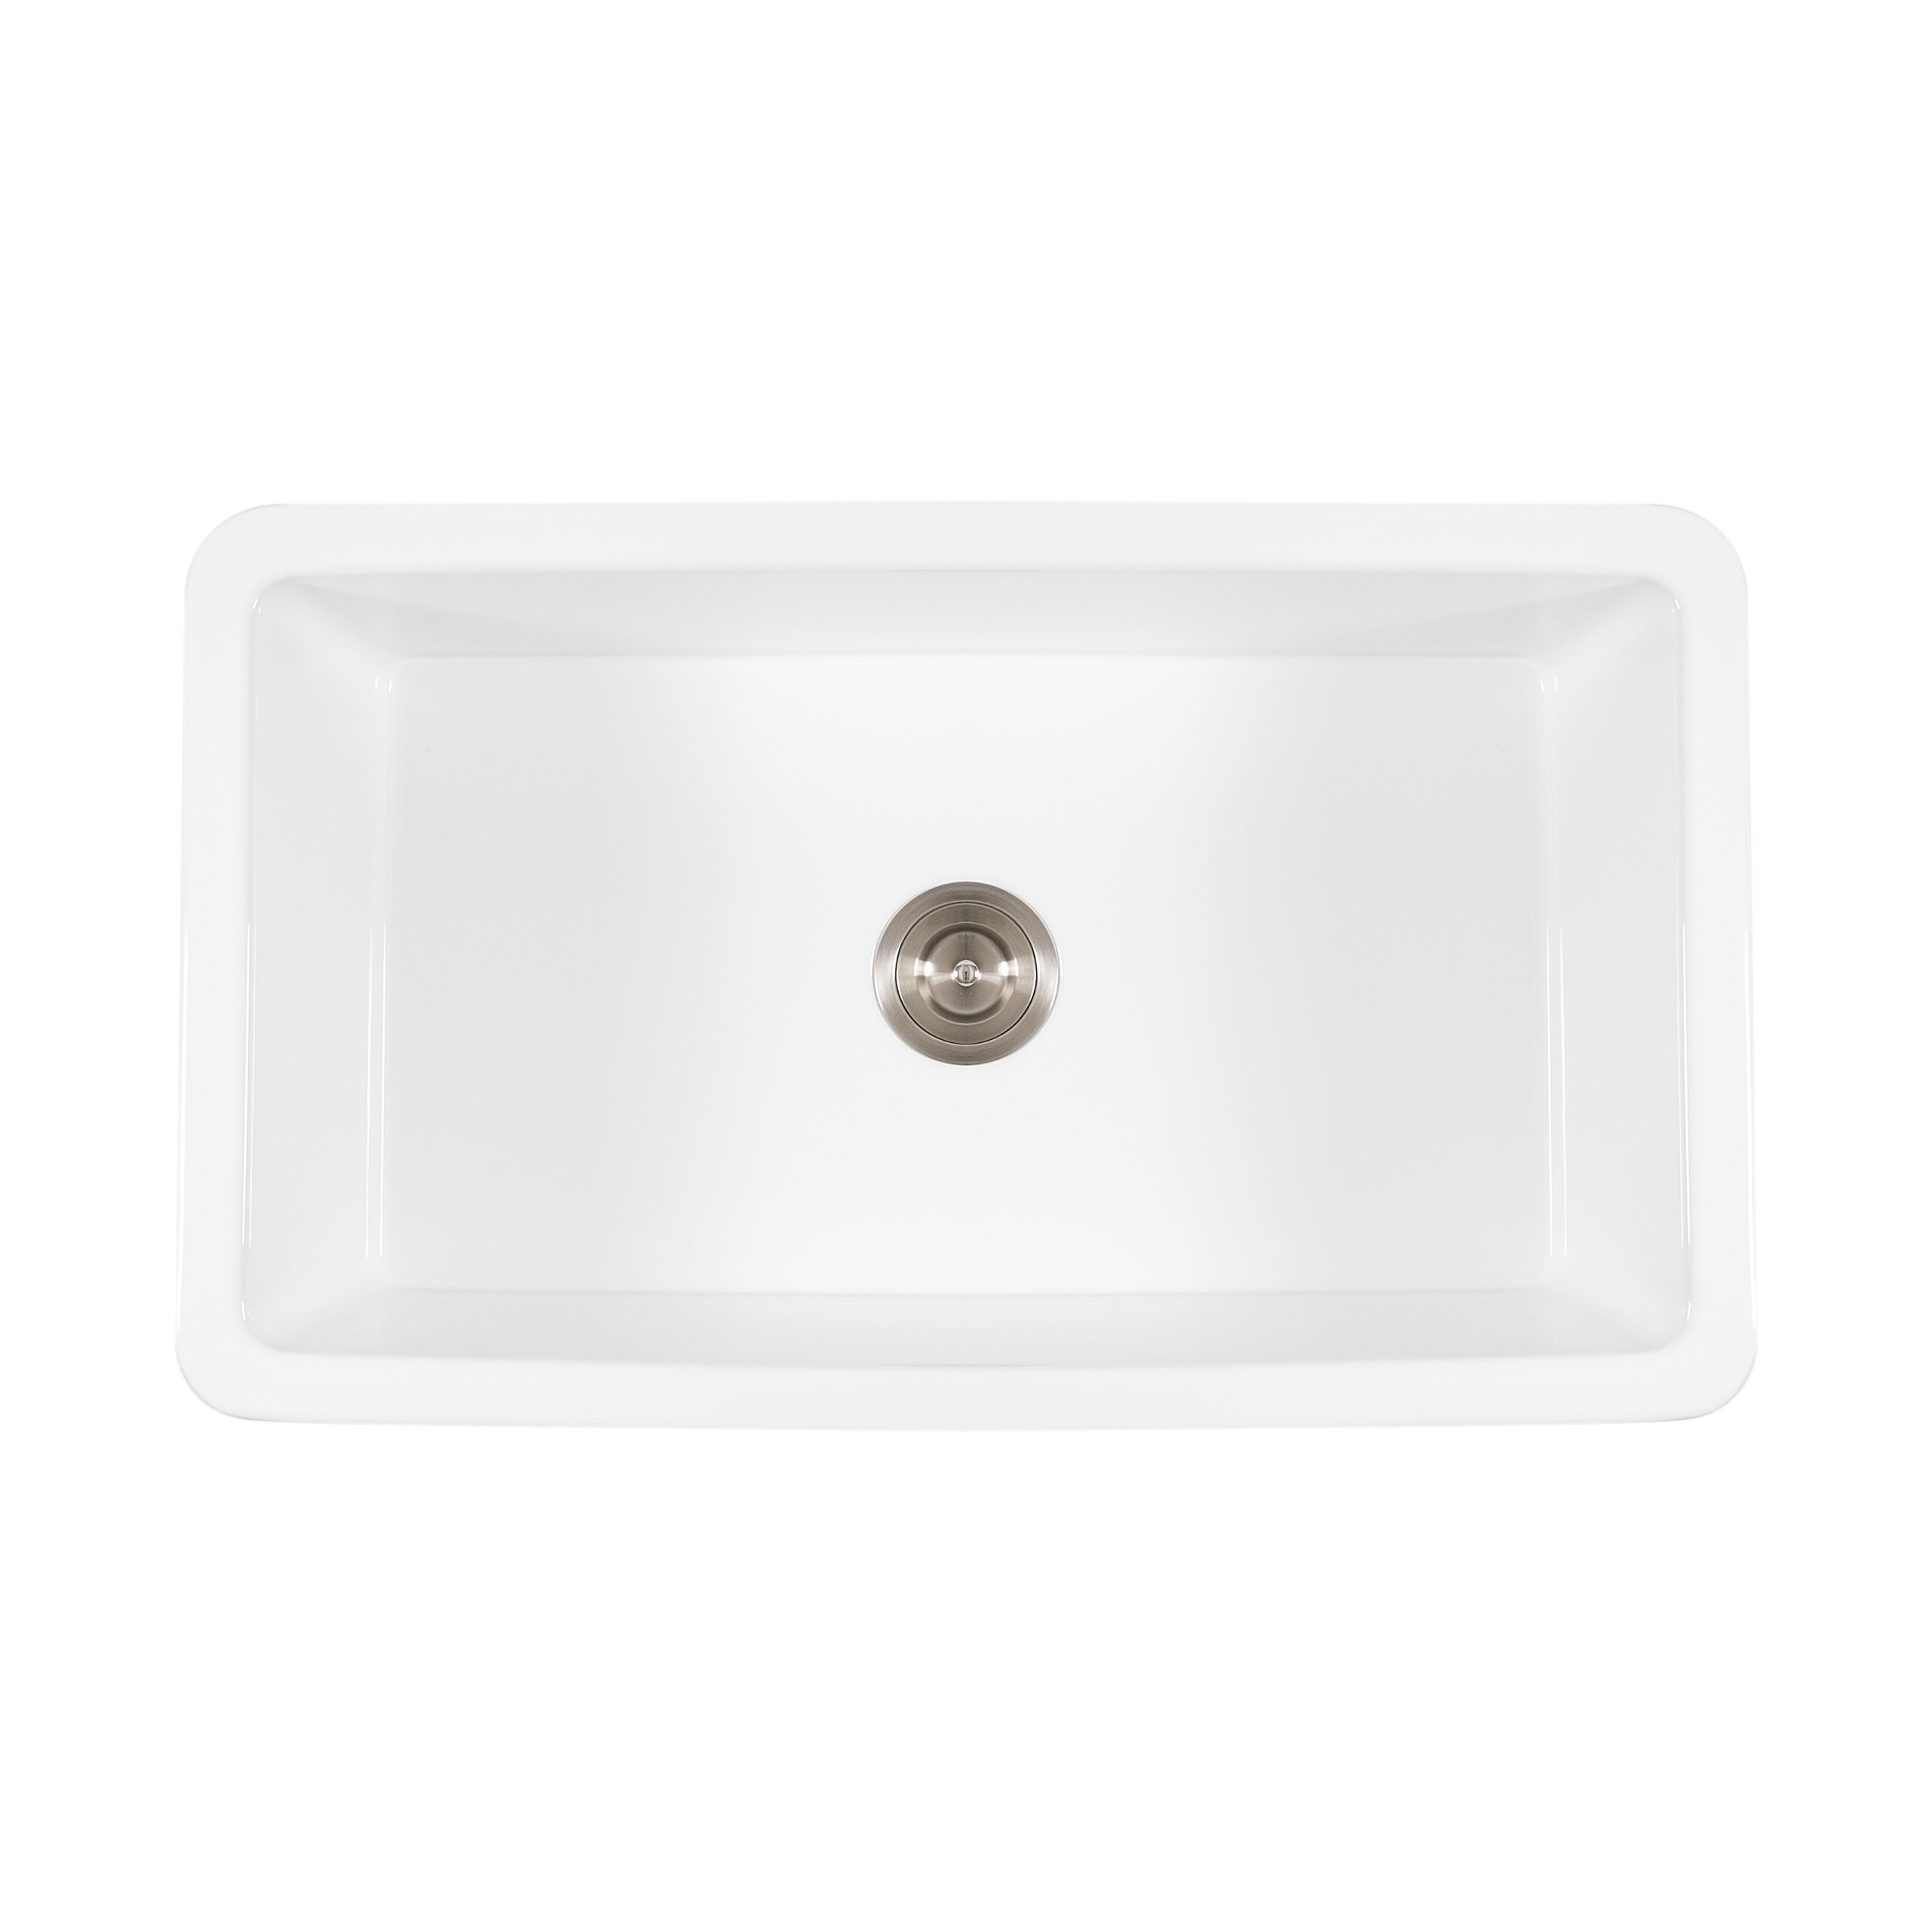 30 Inch Fireclay Kitchen Sink with Cutting Board - White